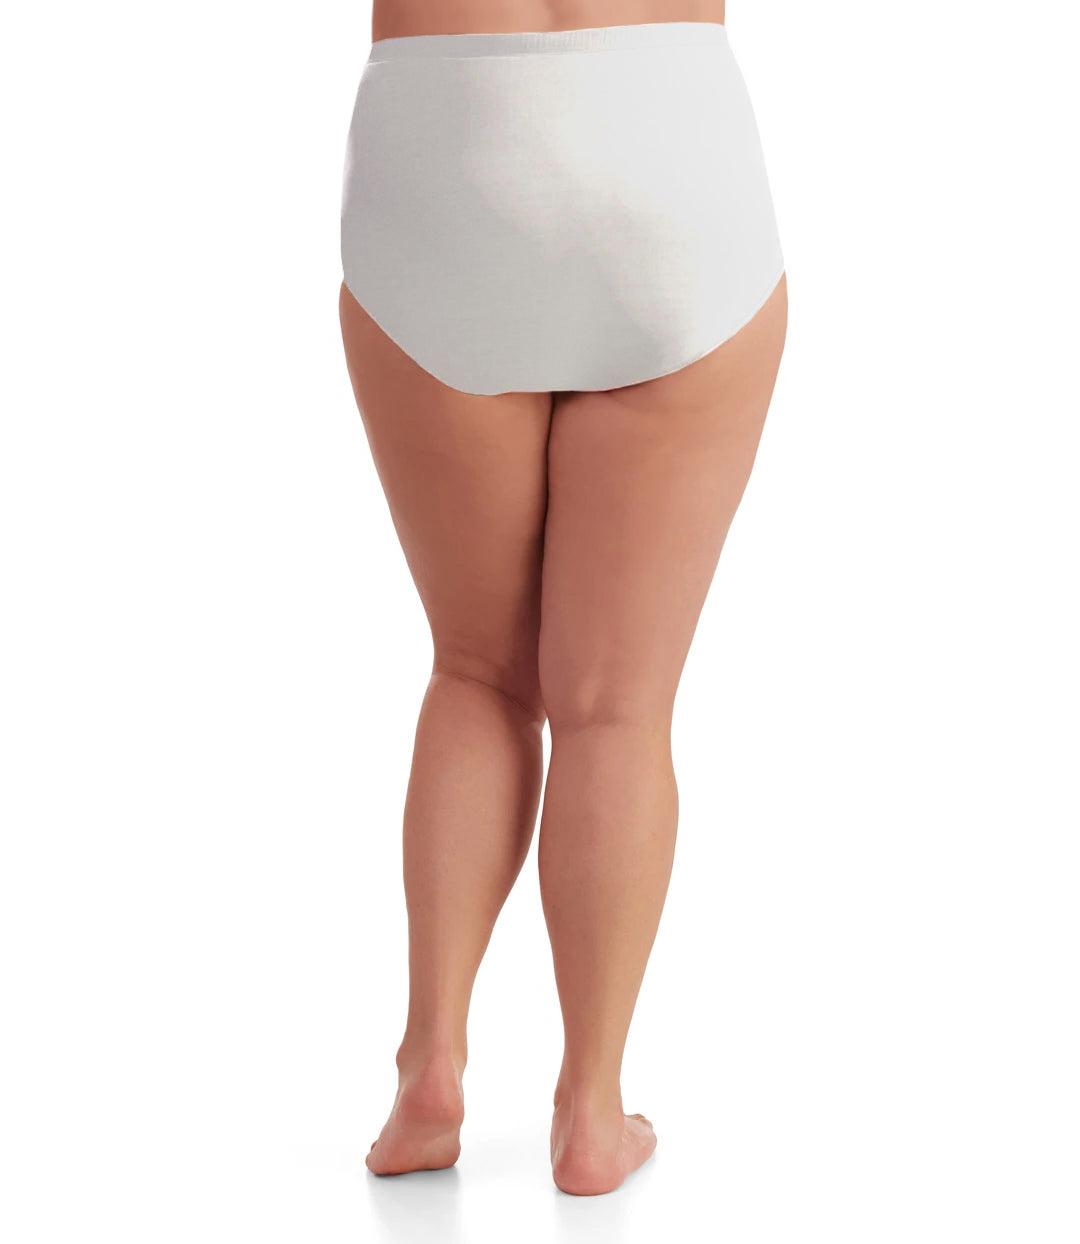 Bottom half of plus sized woman, back view, wearing JunoActive Junowear Cotton Stretch Classic Full Fit Brief in white. This brief has a high waist fit with conservative leg opening.